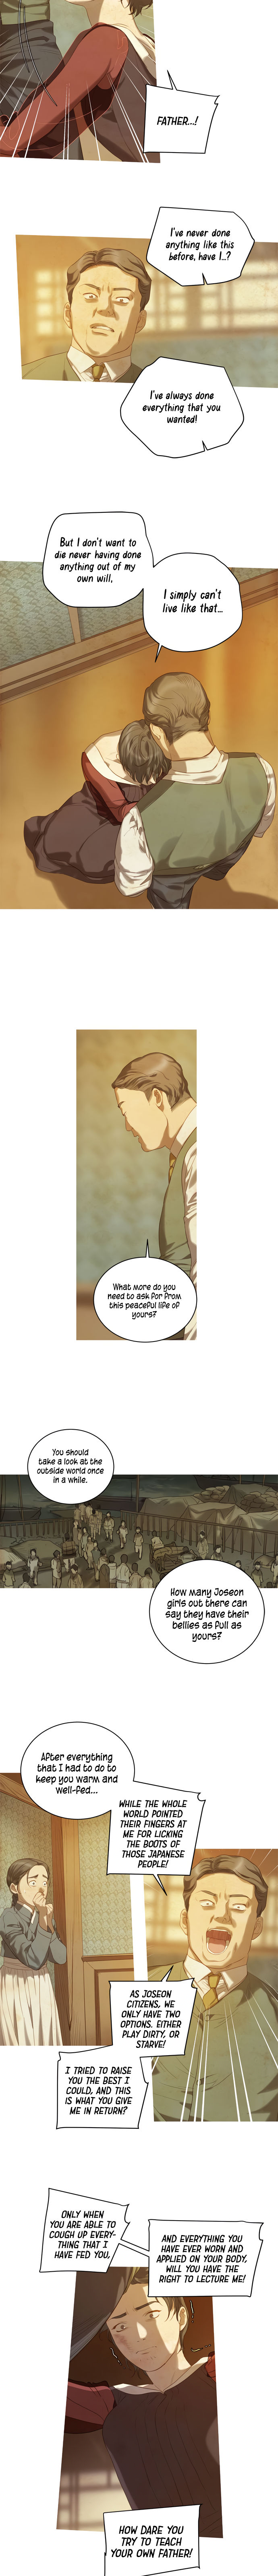 Gorae Byul - The Gyeongseong Mermaid - Chapter 13 Page 4